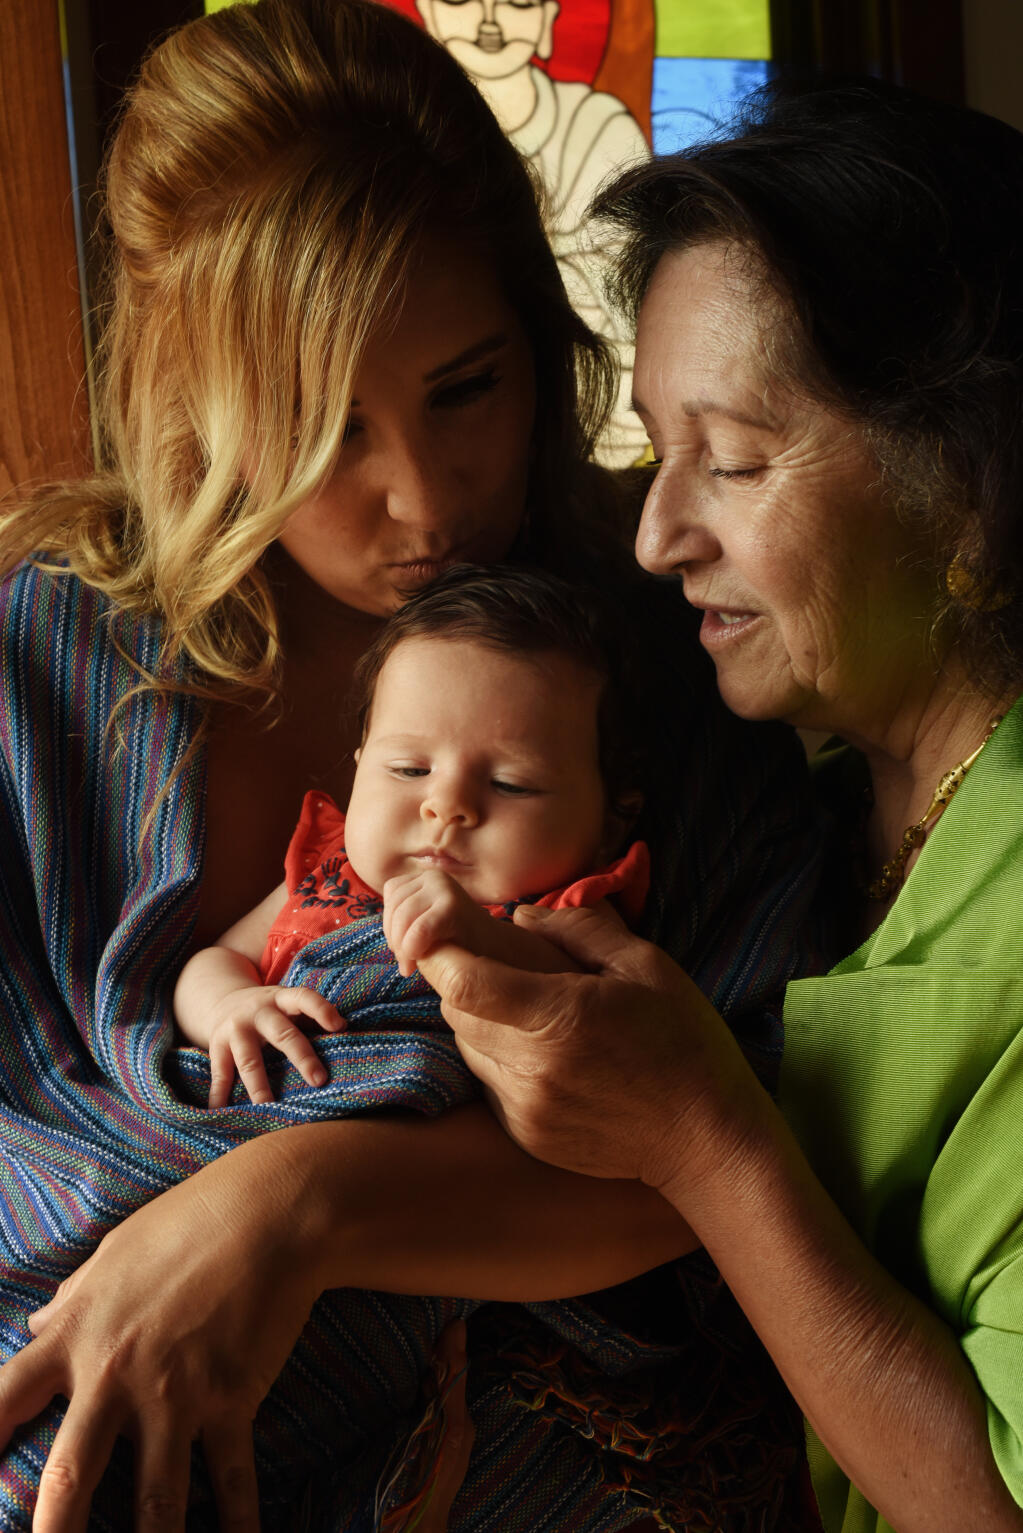 Amelia Morán Ceja with her daughter, Dahlia Ceja Swedelson, and her 10-week-old granddaughter, Luna Isabella Ceja Swedelson, at La Capilla; a chapel that sits near Amelia’s home in Napa. Amelia said mothers show love through food. She cooks with her daughter just as her grandmother cooked with her in Mexico. (Erik Castro/For The Press Democrat)